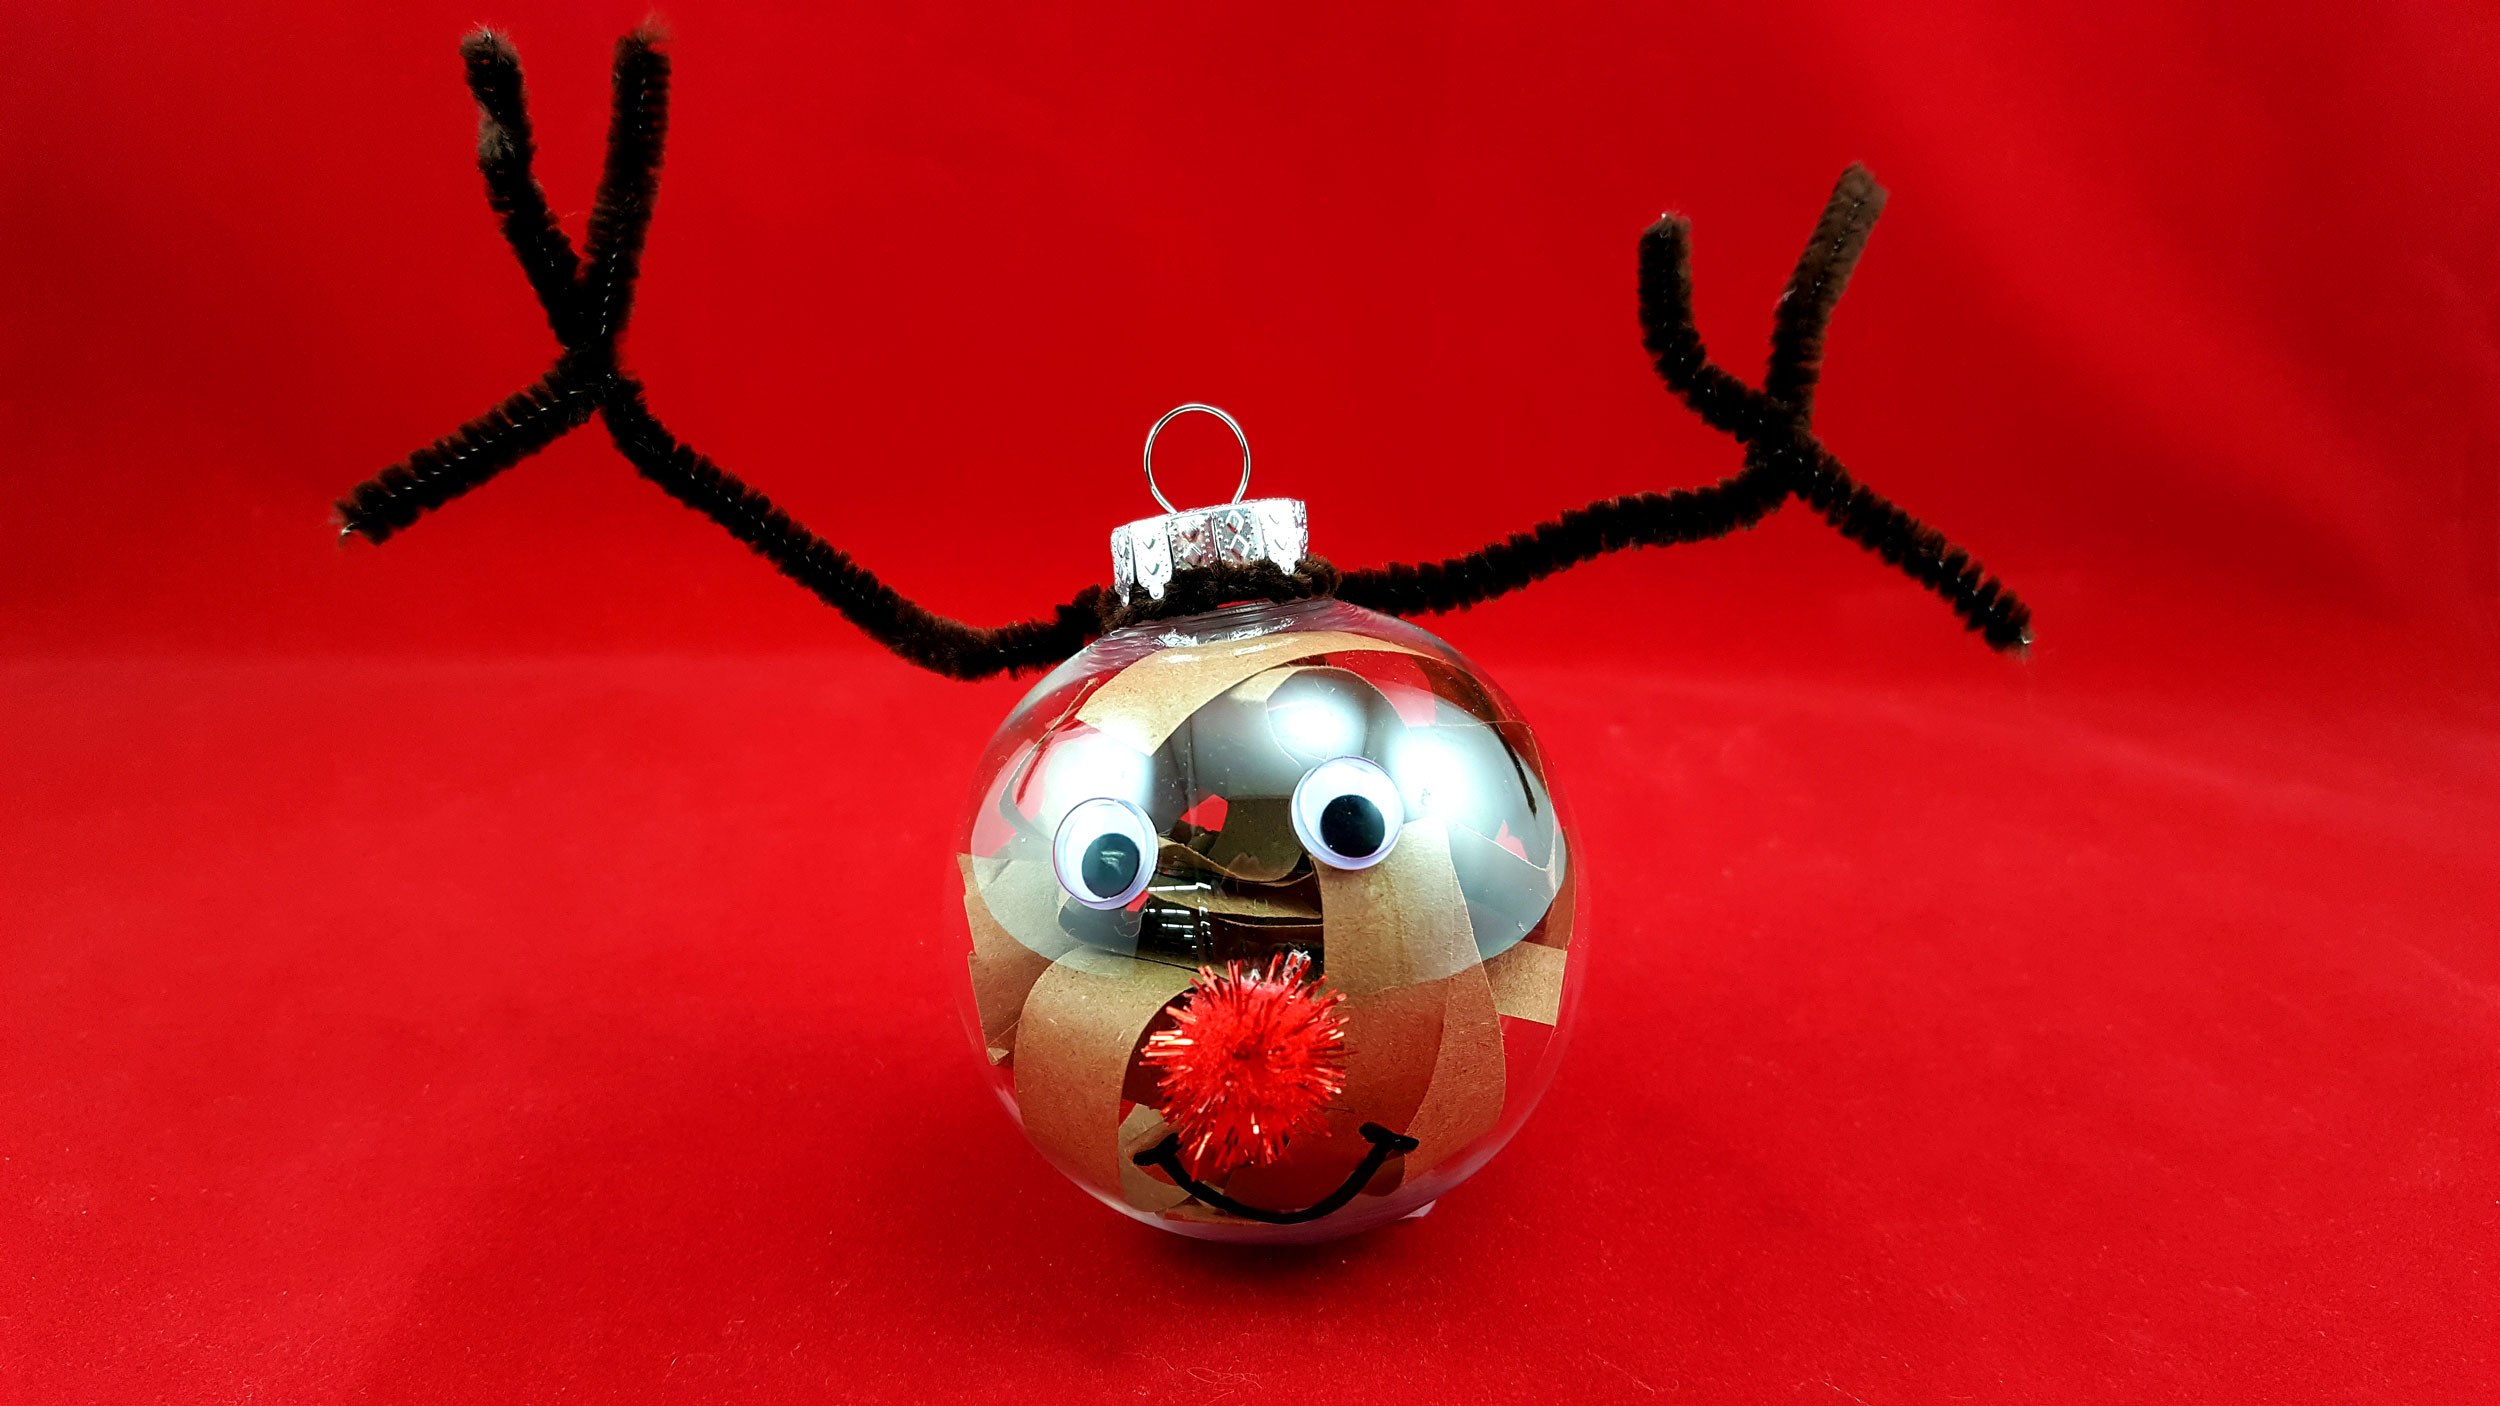 Reindeer ornament create antler with pipe cleaner pieces. | OrnamentShop.com